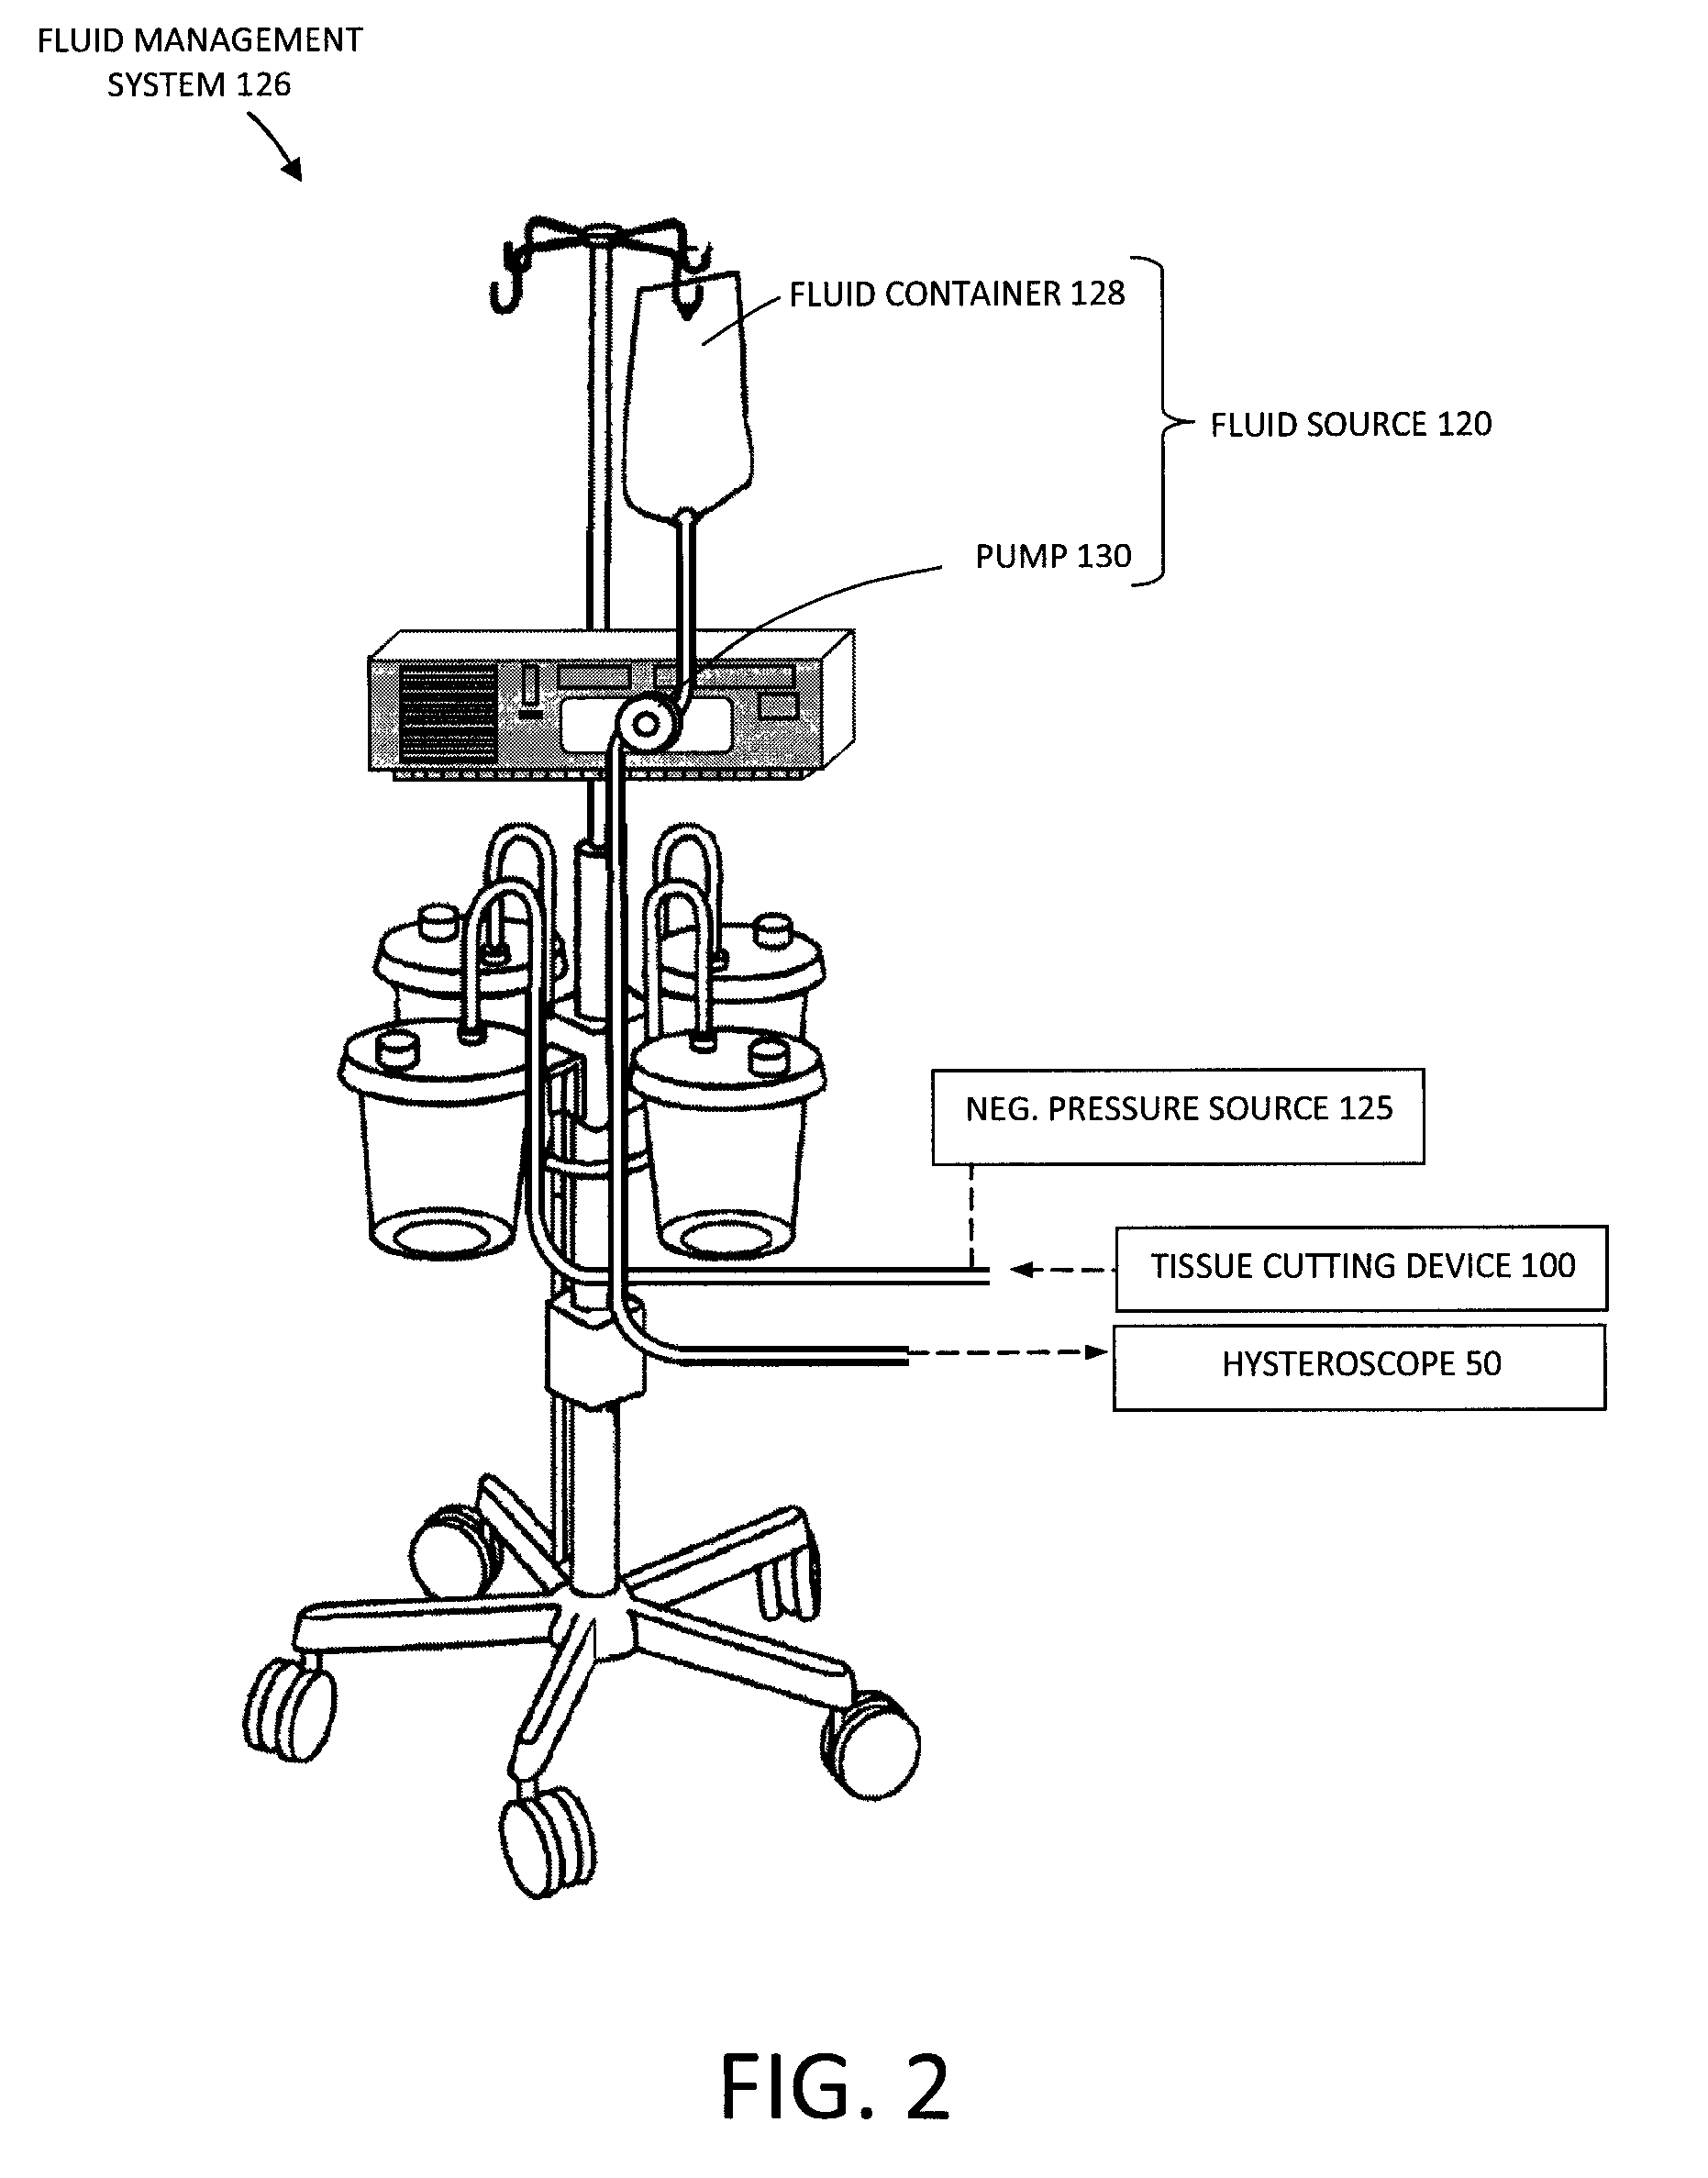 Surgical fluid management systems and methods